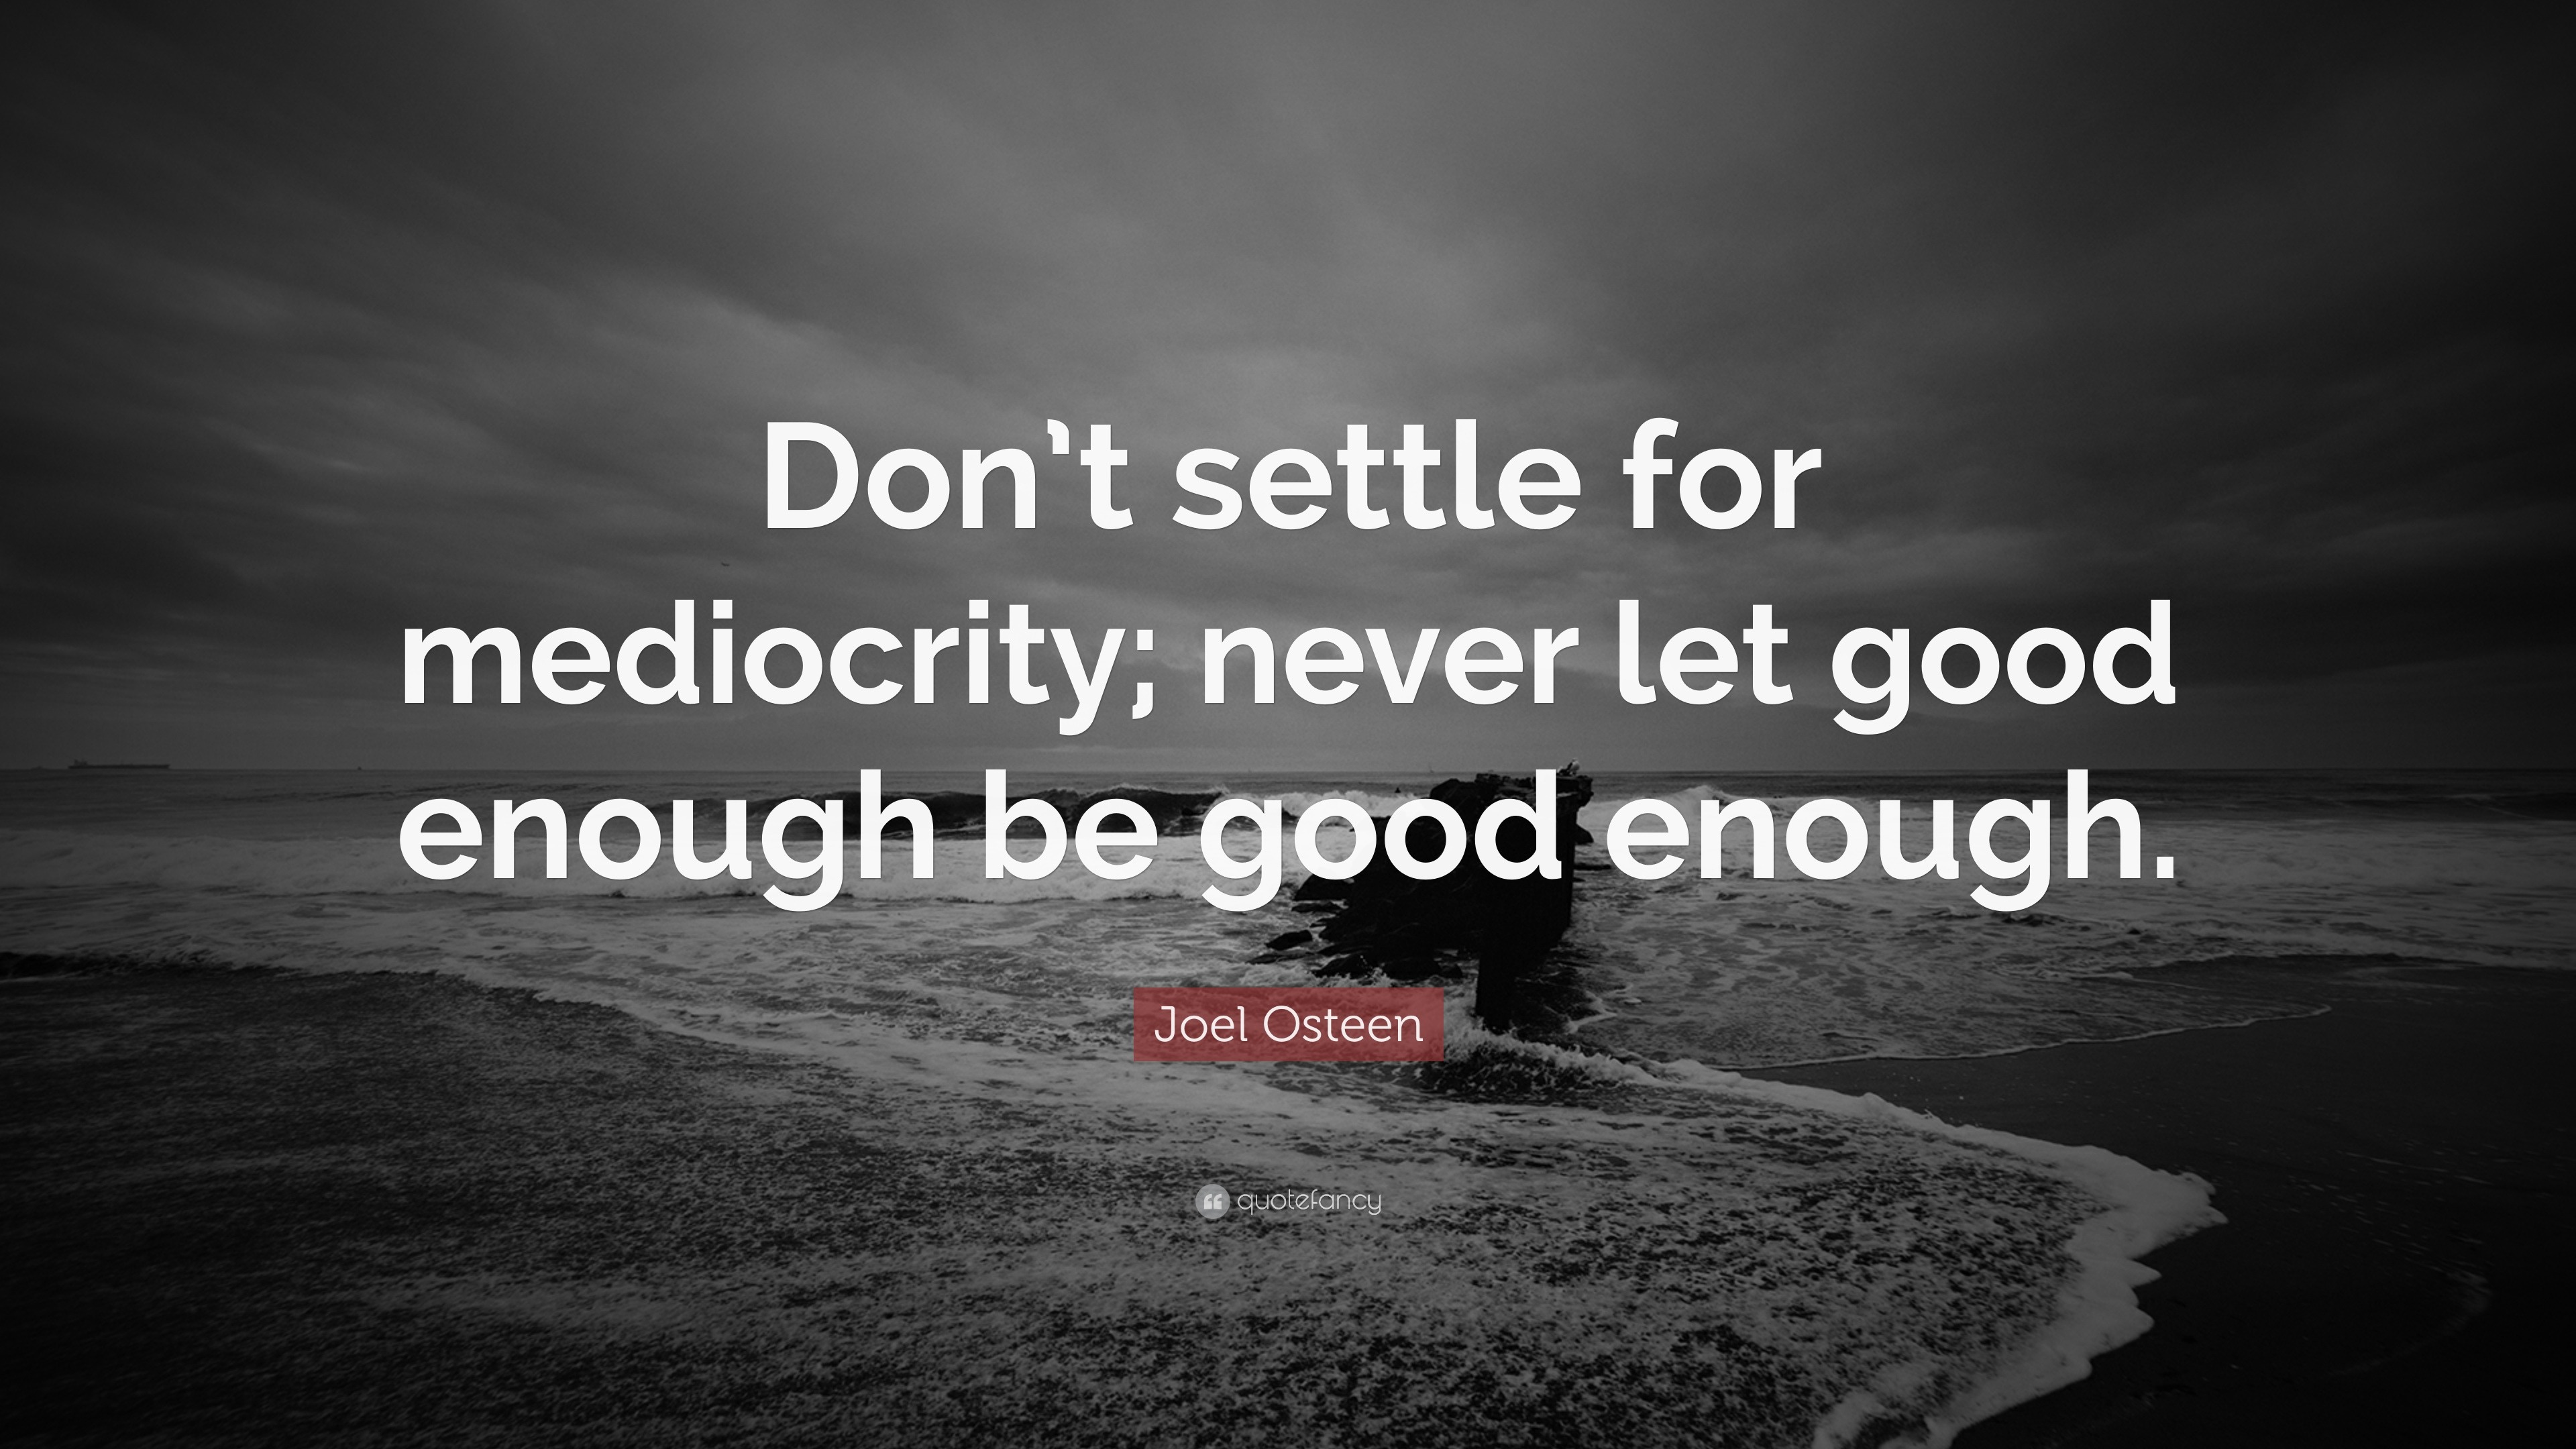 Joel Osteen Quote “Don’t settle for mediocrity; never let good enough